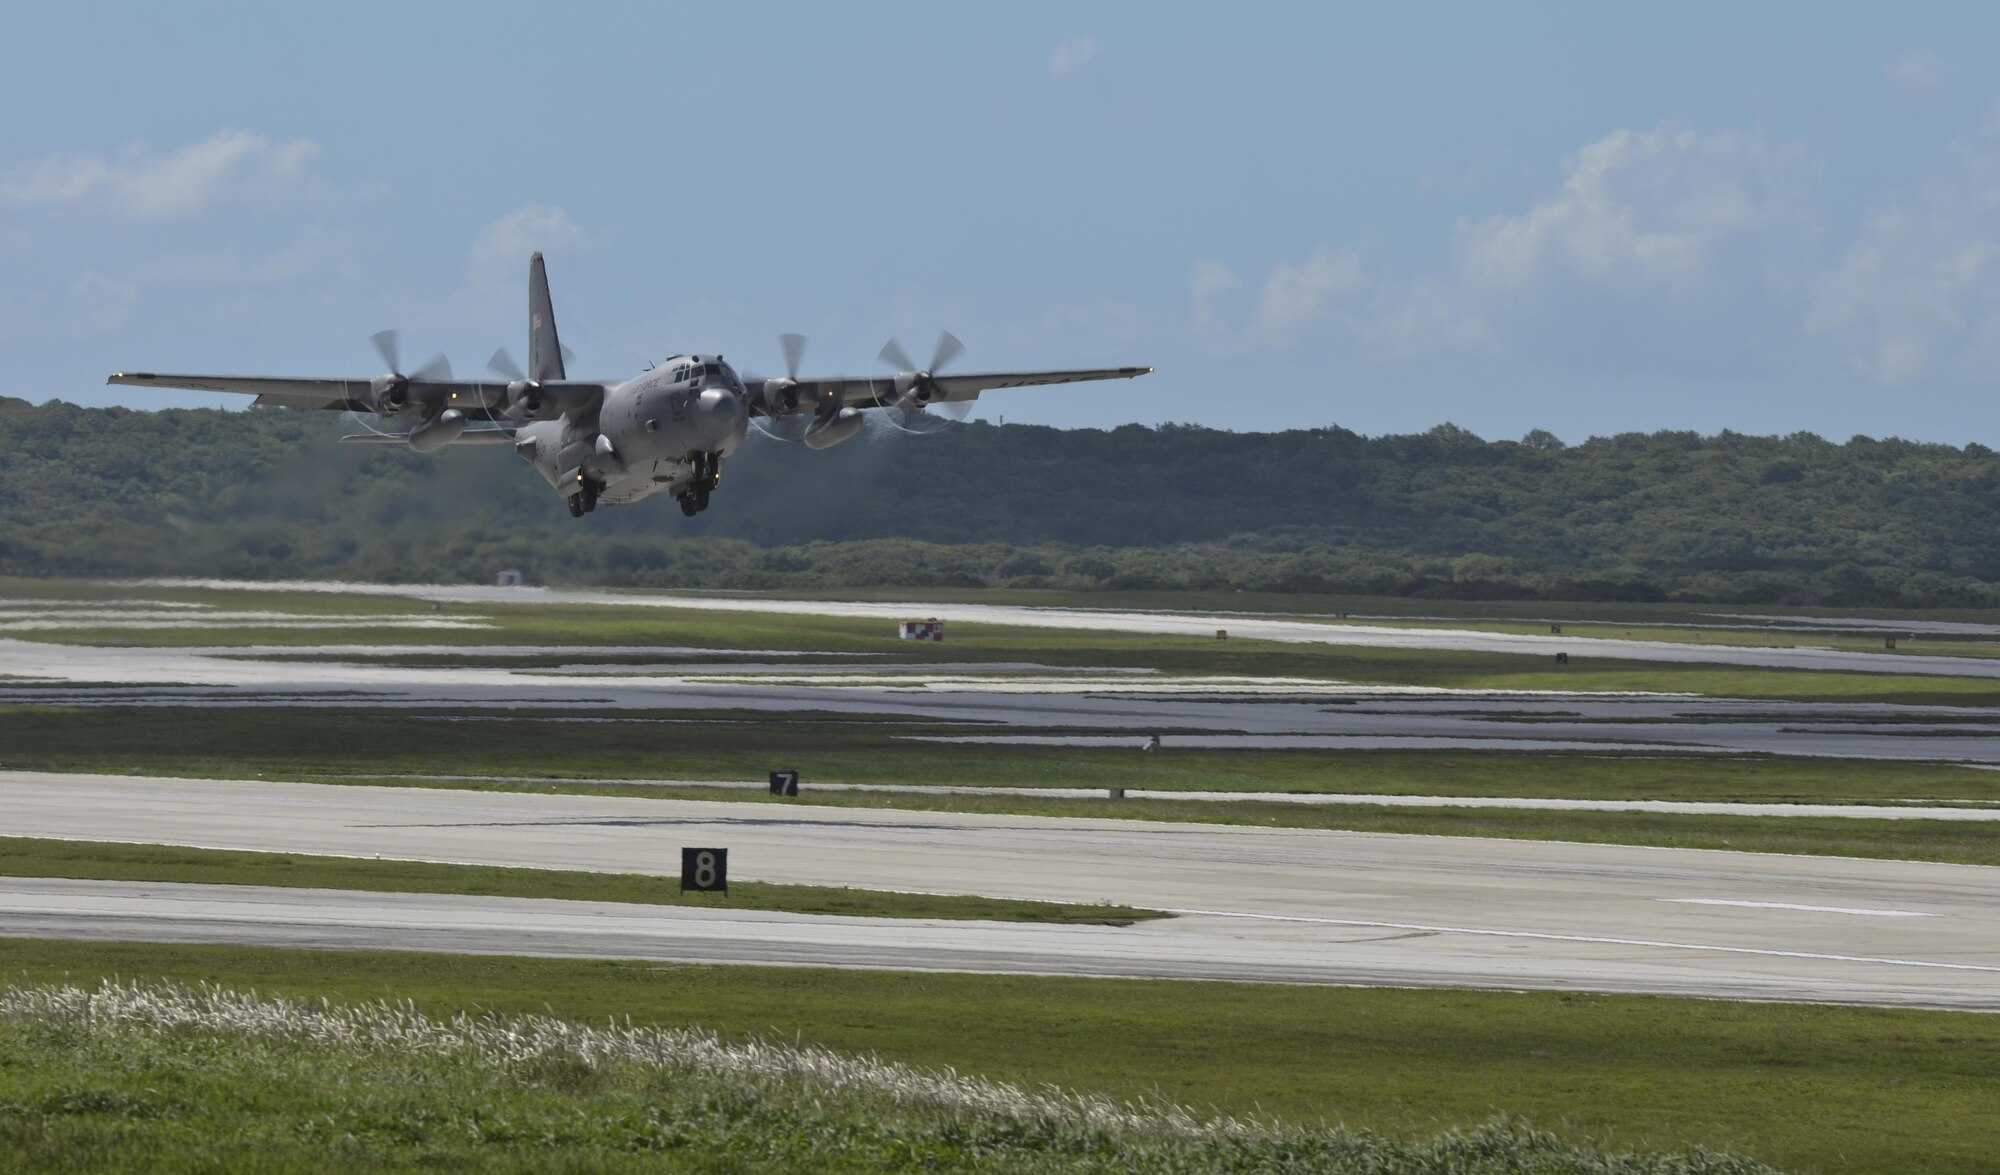 A C-130 Hercules takes off from Andersen Air Force Base, Guam, Nov. 14, 2013, transporting Airmen and equipment in support of Operation Damayan. Operation Damayan is a U.S. humanitarian aid and disaster relief effort to support the Philippines in the wake of the devastating effects of Typhoon Haiyan. (U.S. Air Force photo by Senior Airman Marianique Santos/Released)